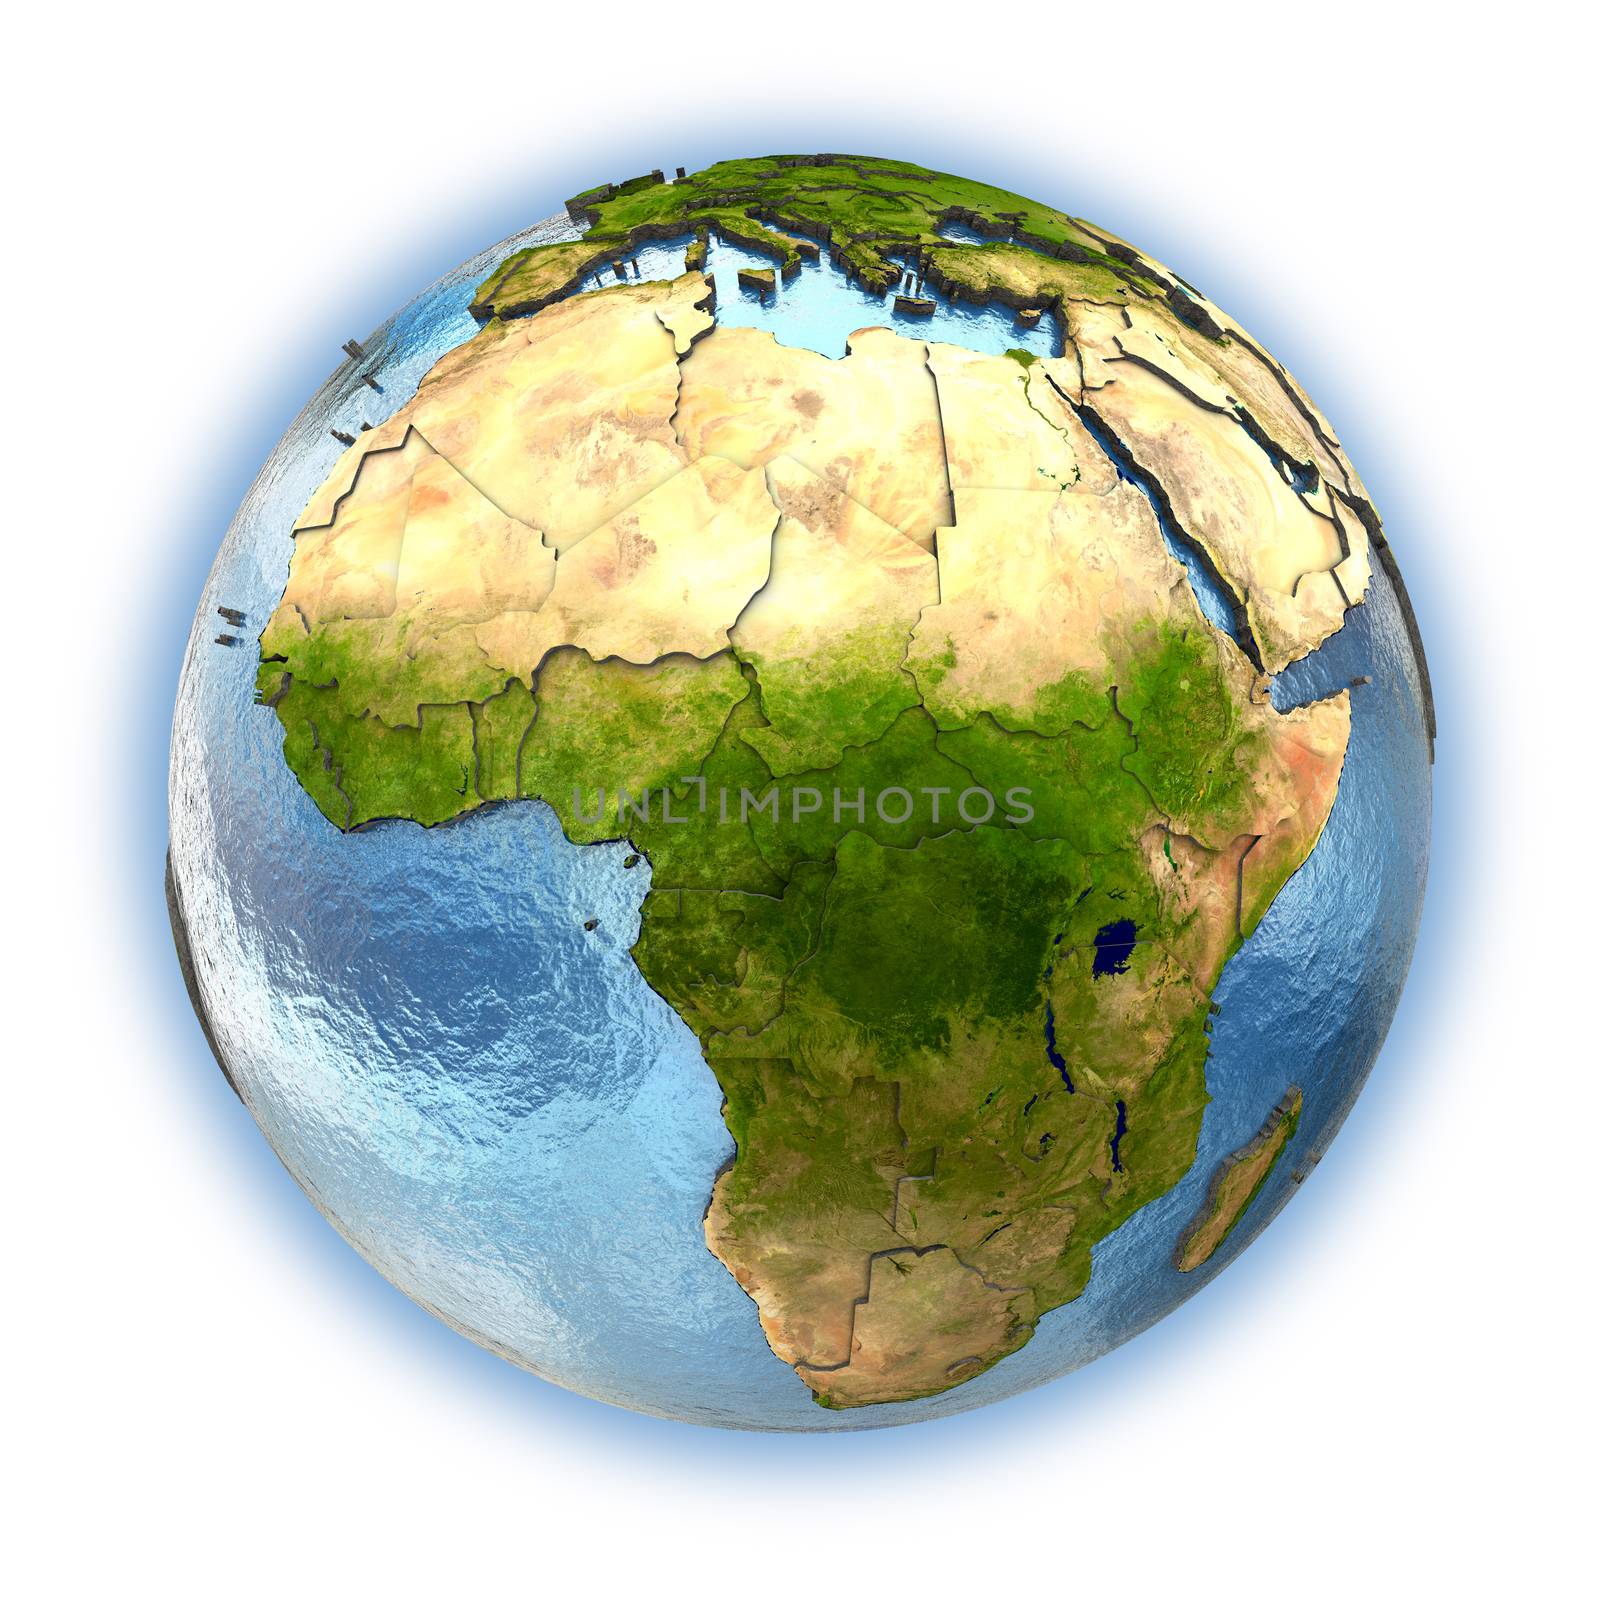 Africa by Harvepino